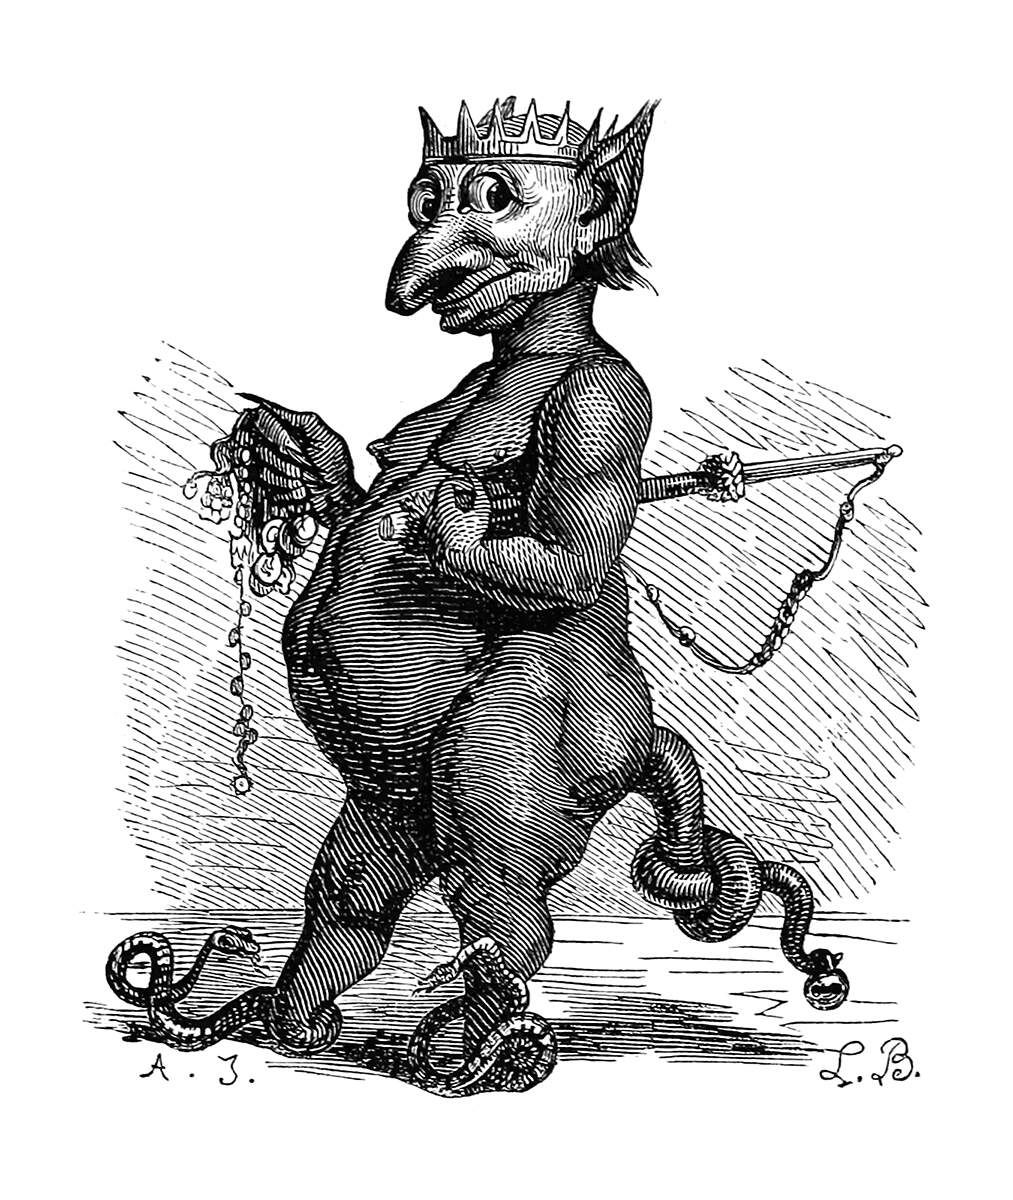 Depiction of Abraxas, here seen as a demon with the head of a king and feet made of two snakes.